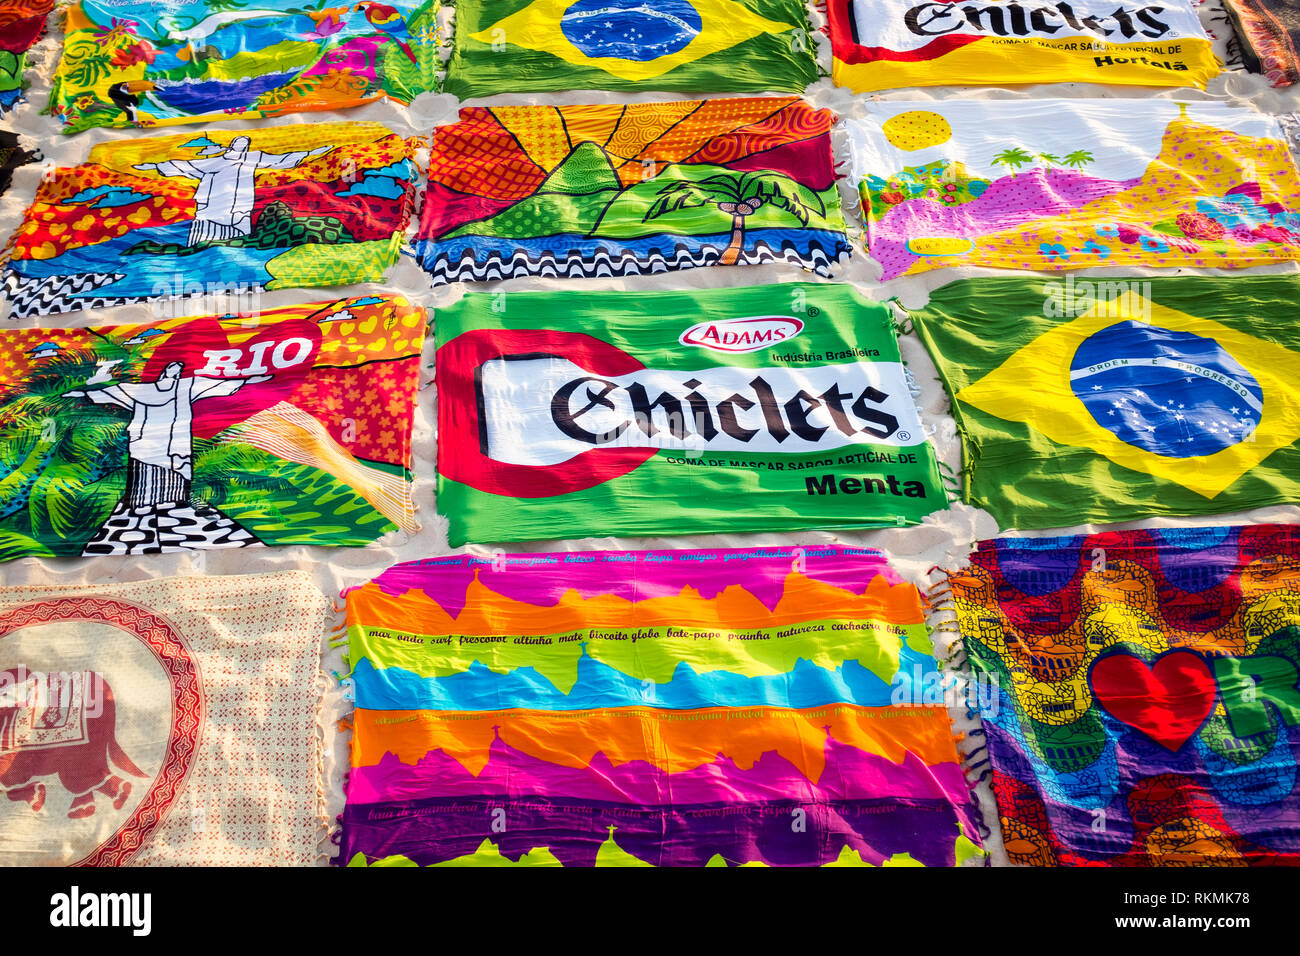 RIO DE JANEIRO - MARCH 15, 2015: Beach blanket sarongs known locally as canga spread out in colorful display along the Ipanema Beach boardwalk. Stock Photo